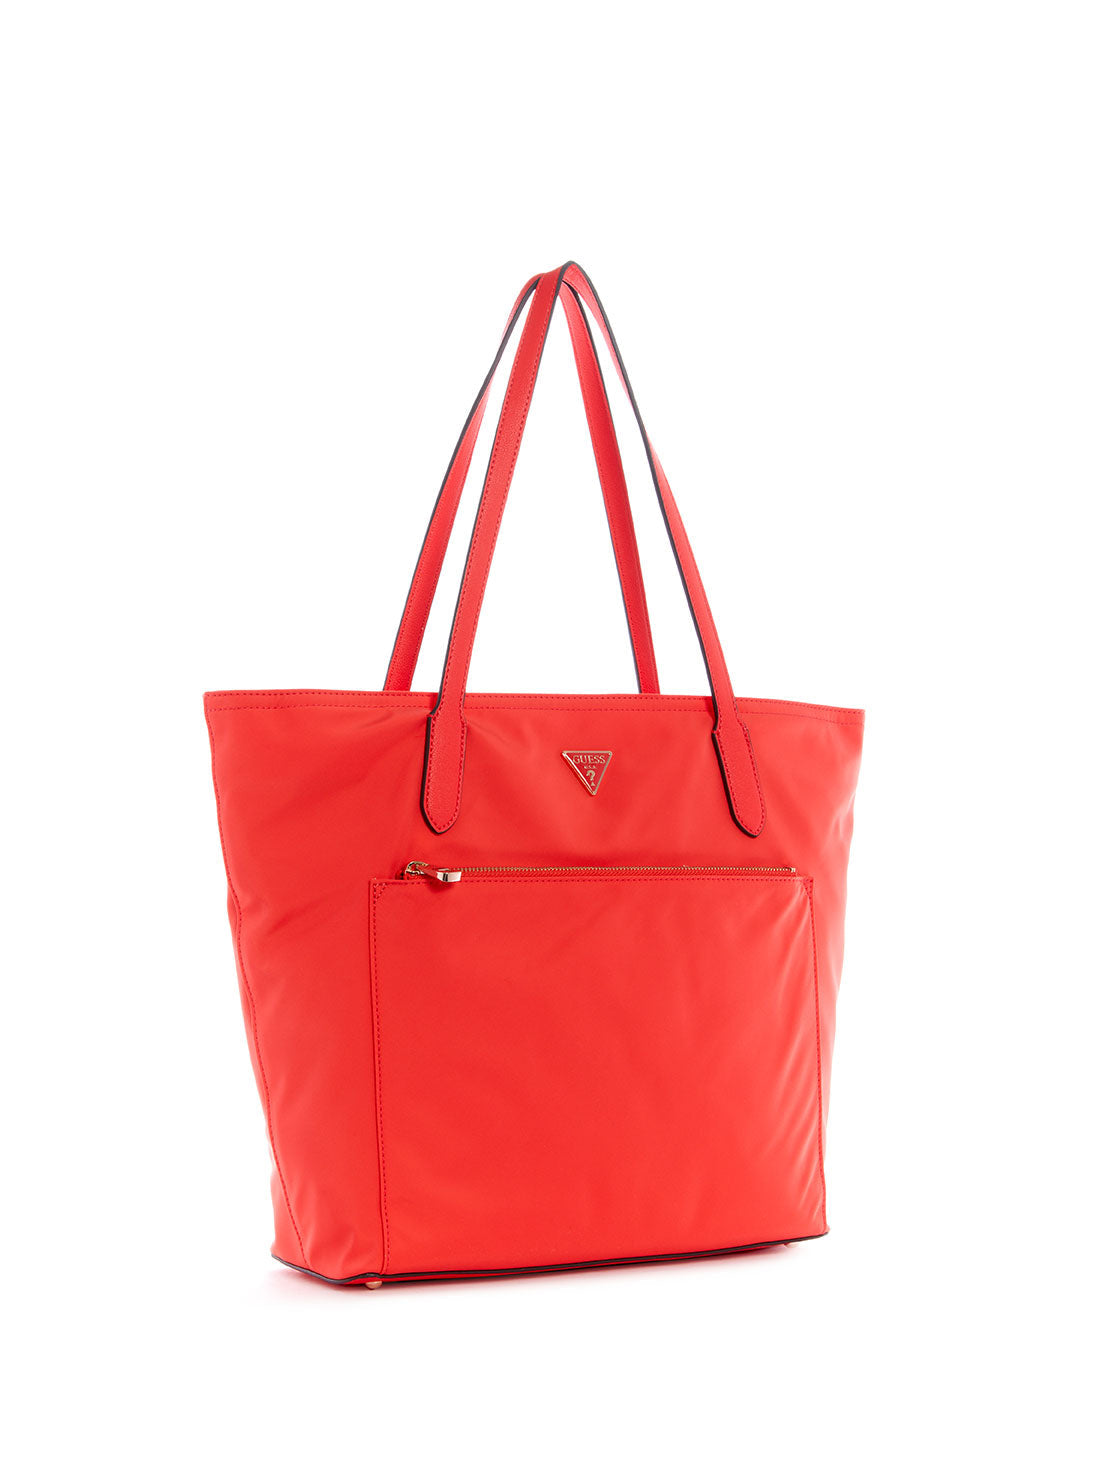 GUESS Women's Eco Red Gemma Tote Bag EYG839523 Front Side View